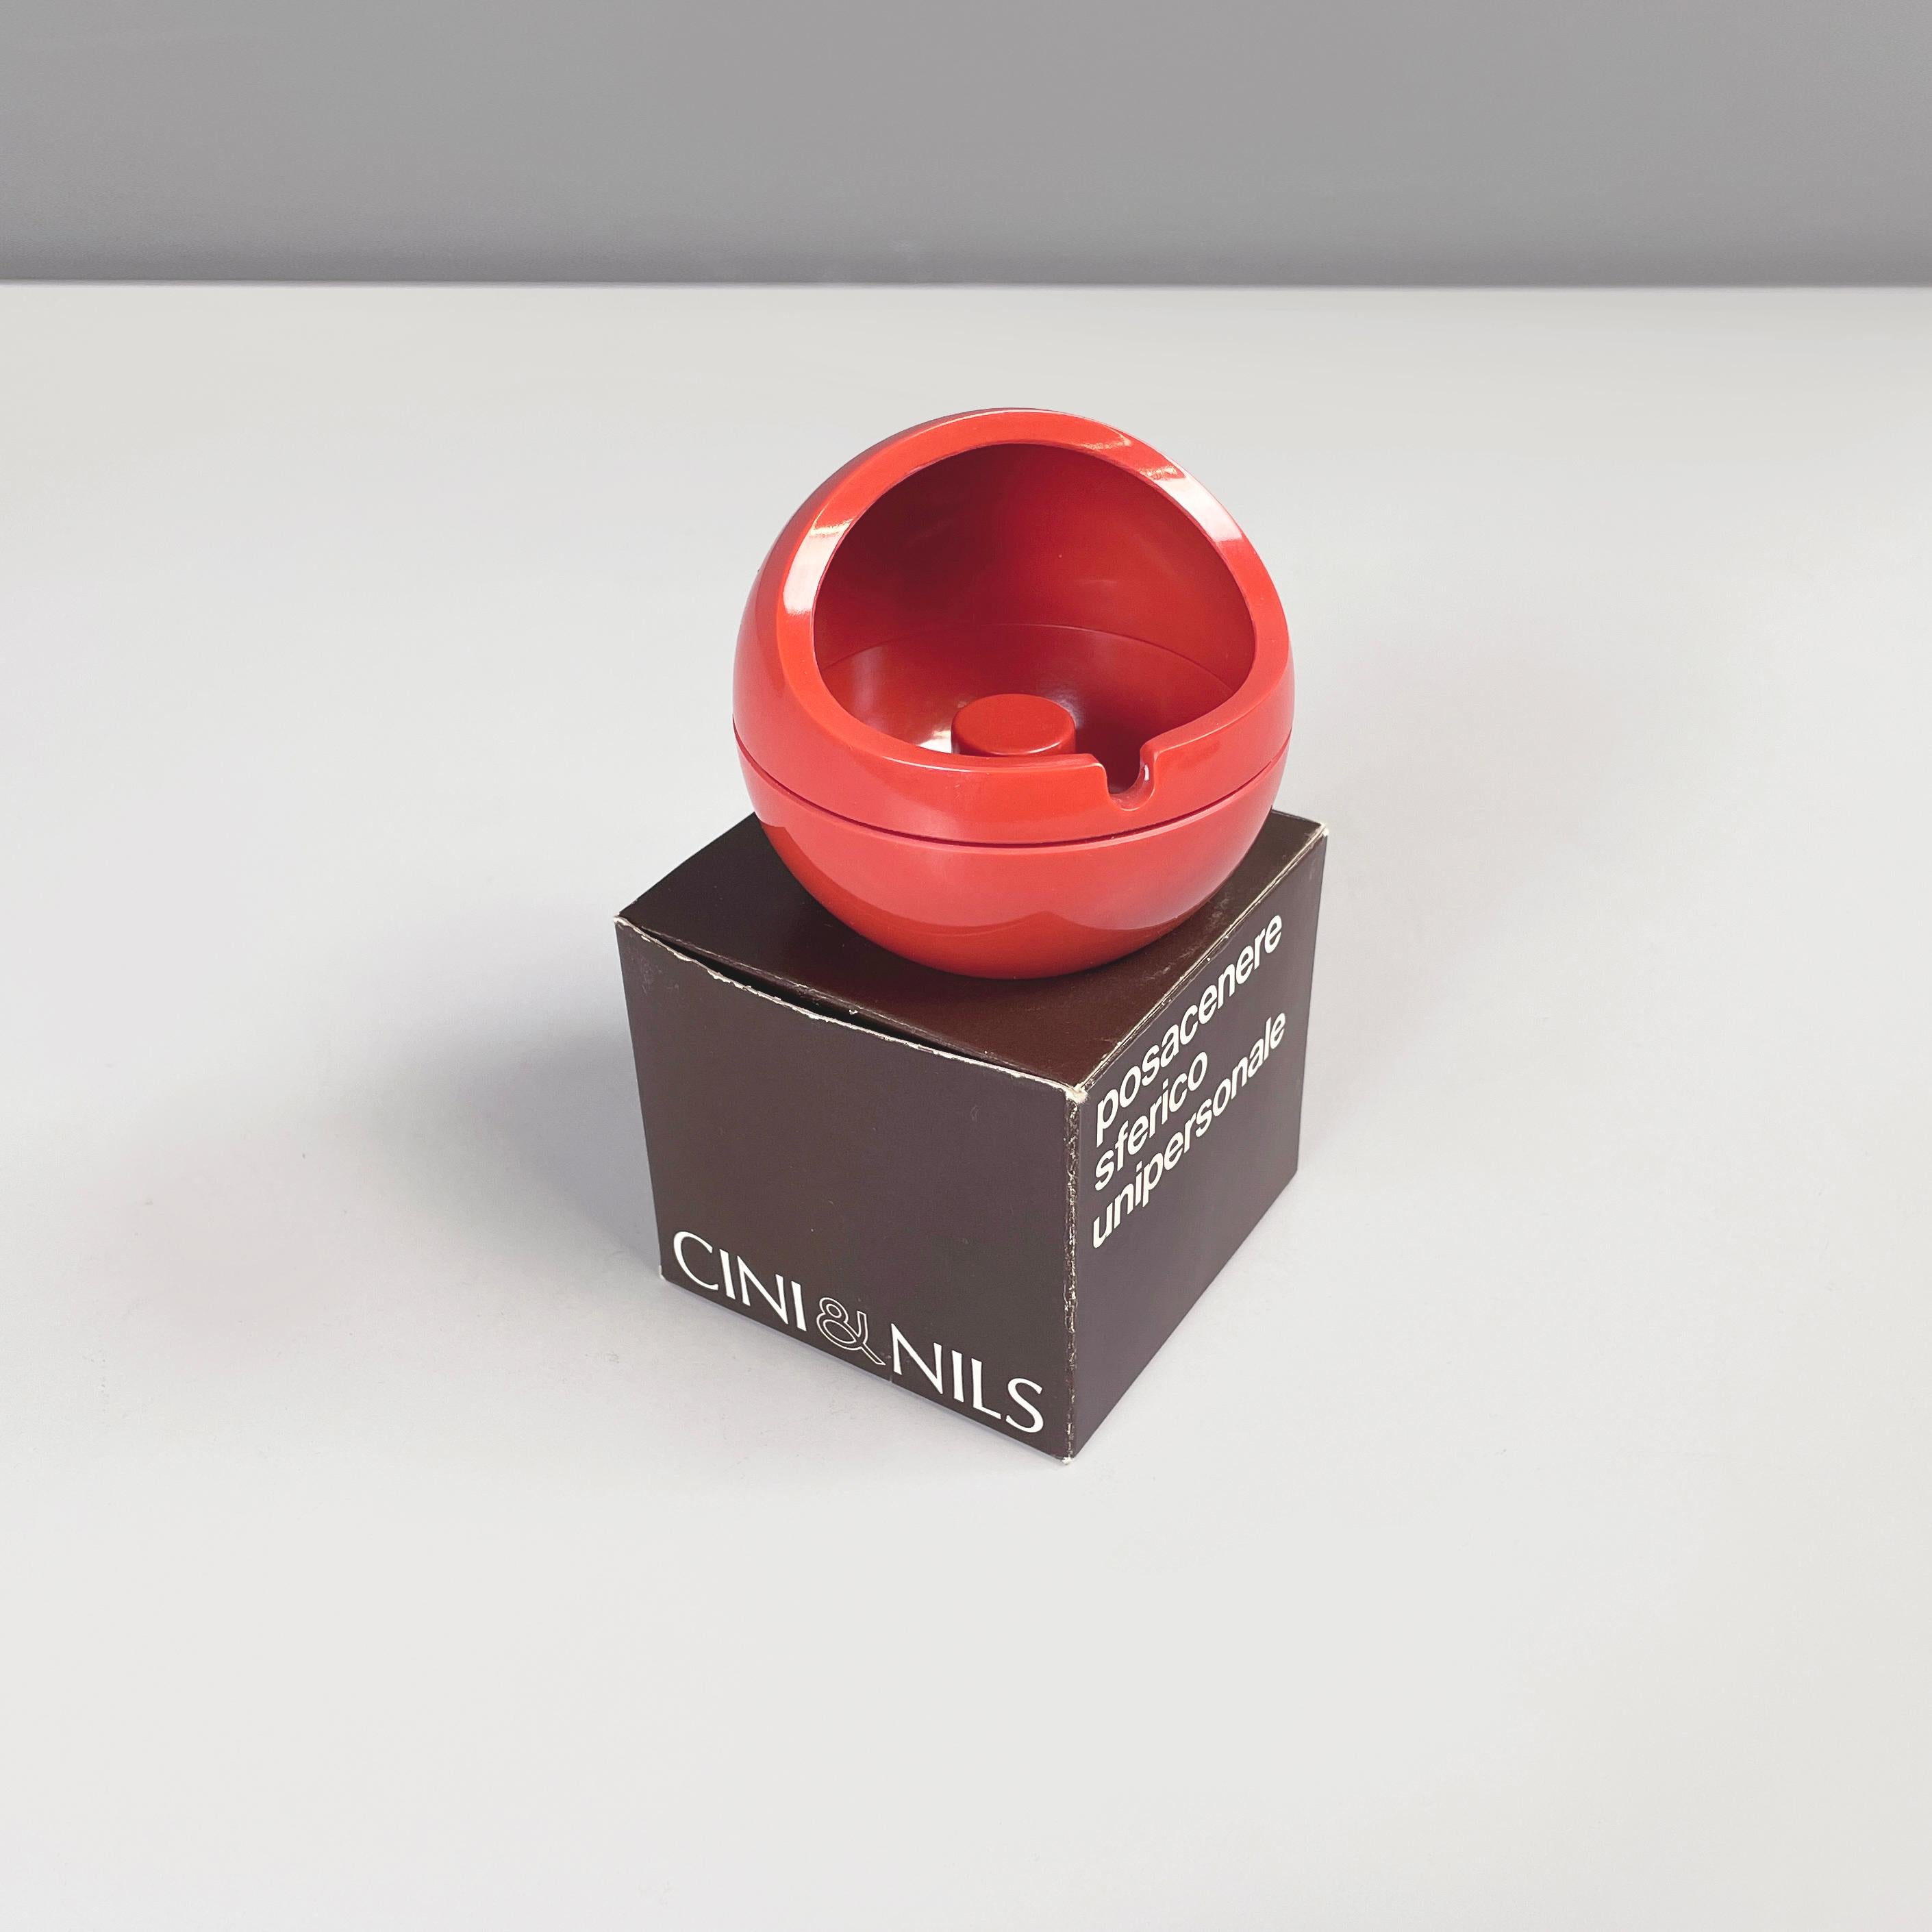 Italian space age Single-person nautical safety ashtray by Opi Studio for Cini & Nils, 1970s
Single-person nautical safety ashtray in red plastic. The structure has a cylinder in the center, useful for extinguishing cigarettes, and a round recess on